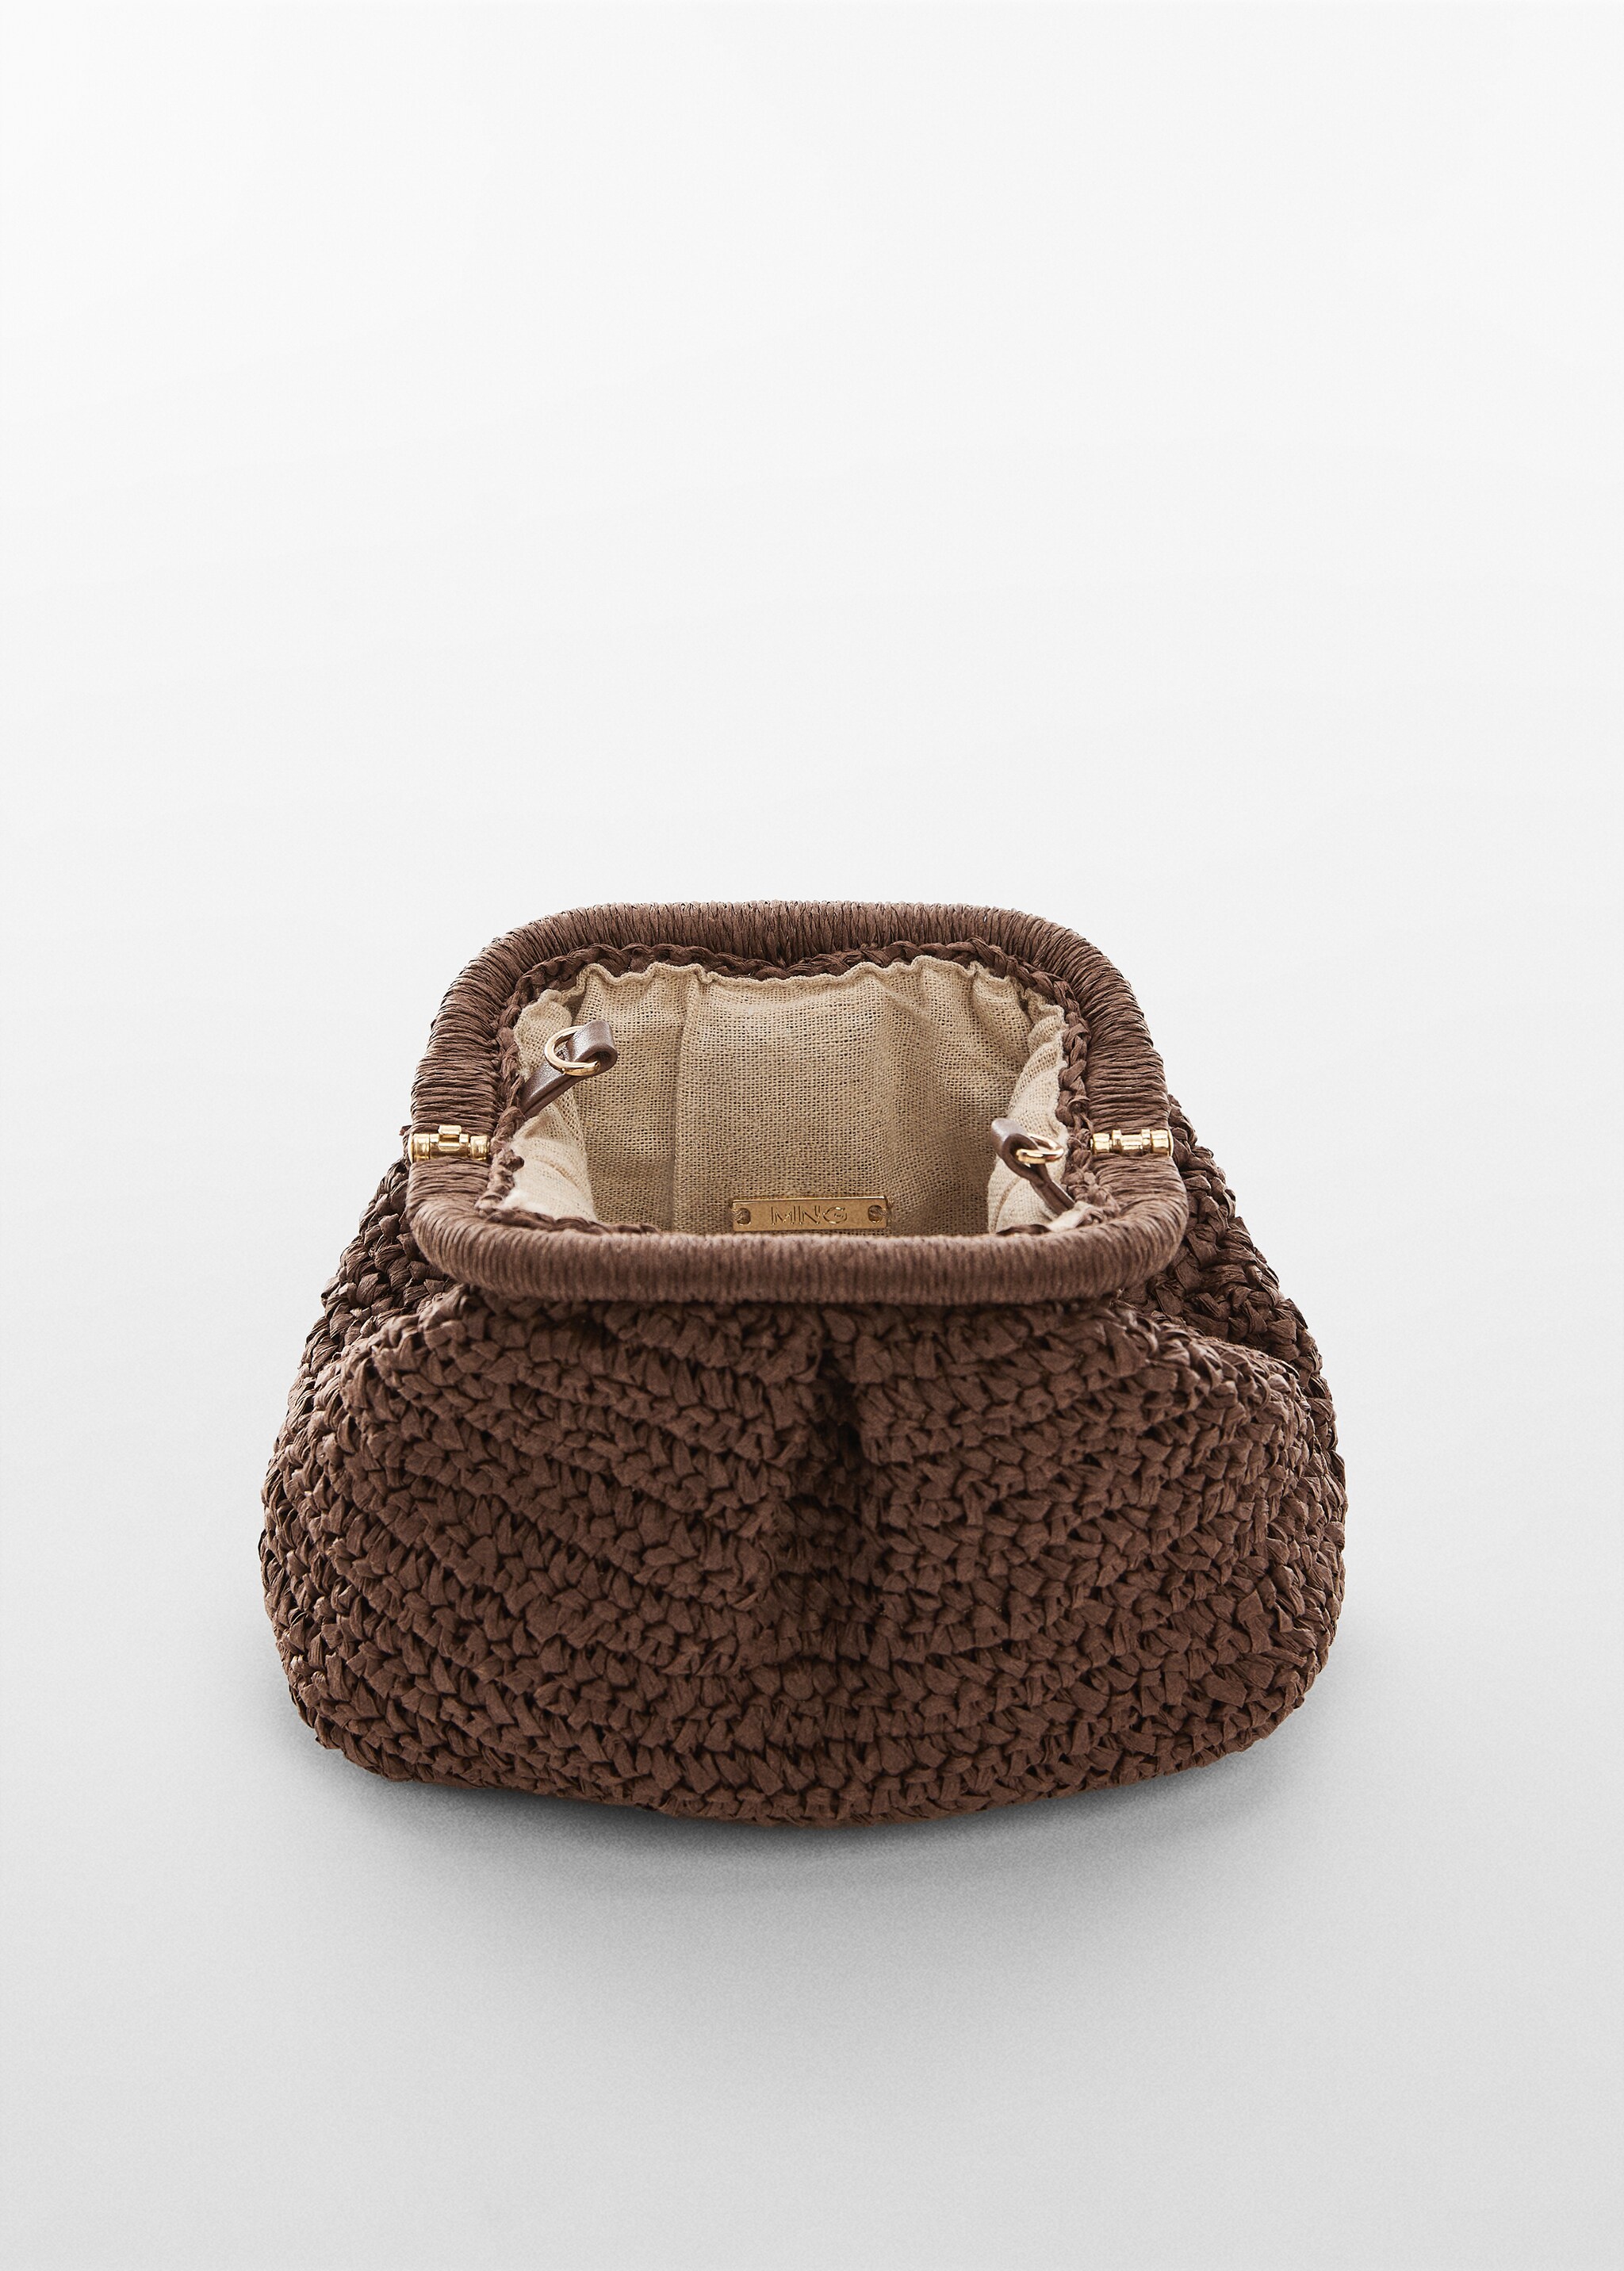 Rattan clutch bag - Details of the article 2